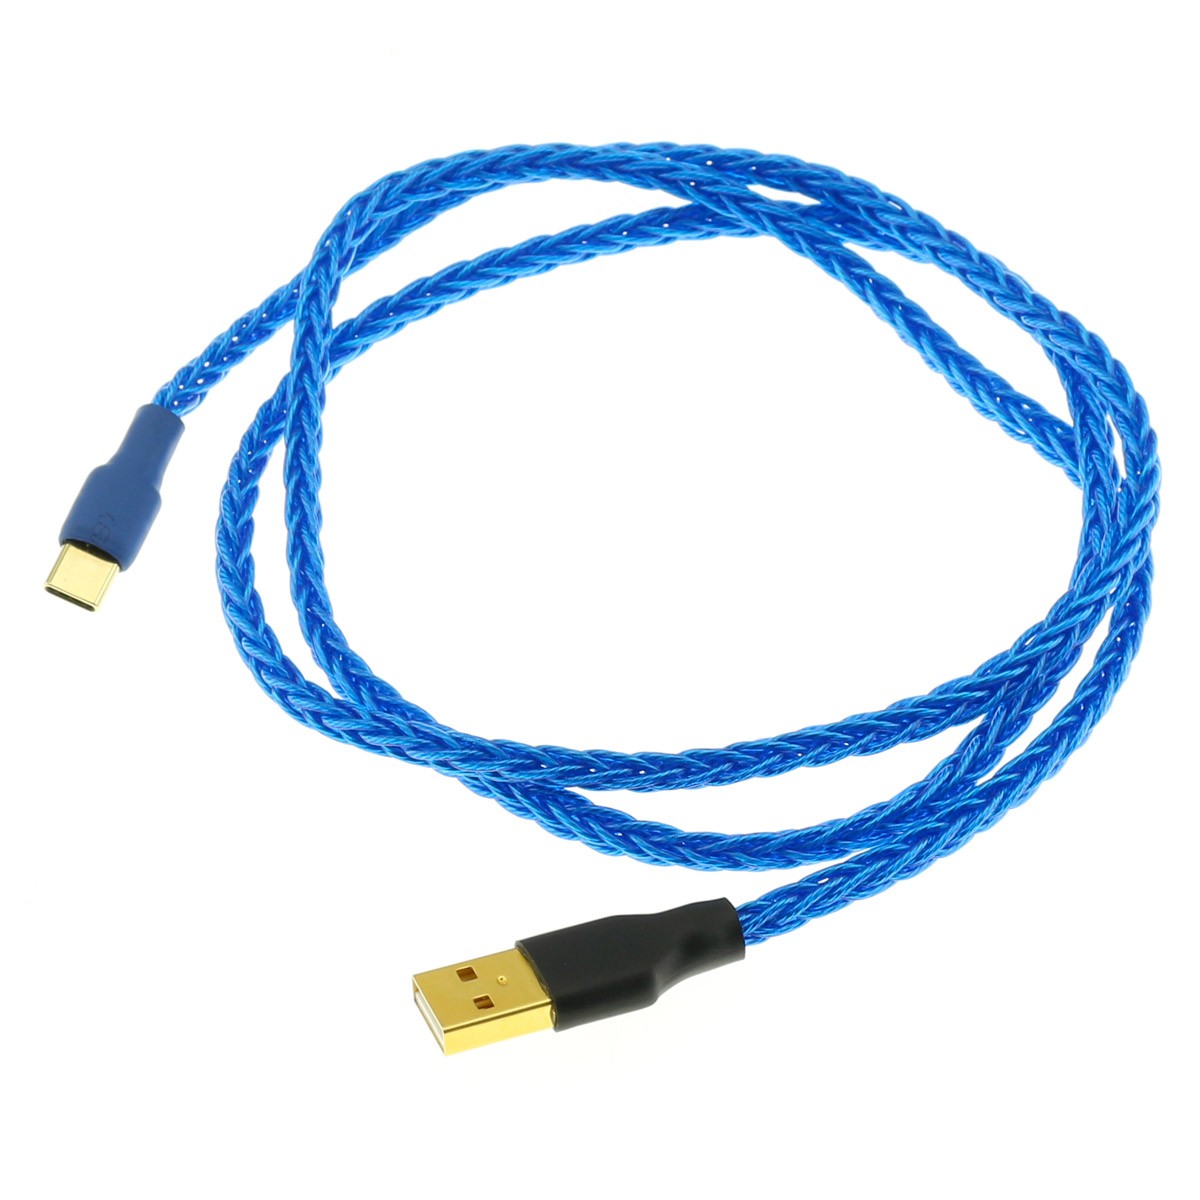 USB-C to USB-A Cable Silver / Gold plated Copper Shielded 1m